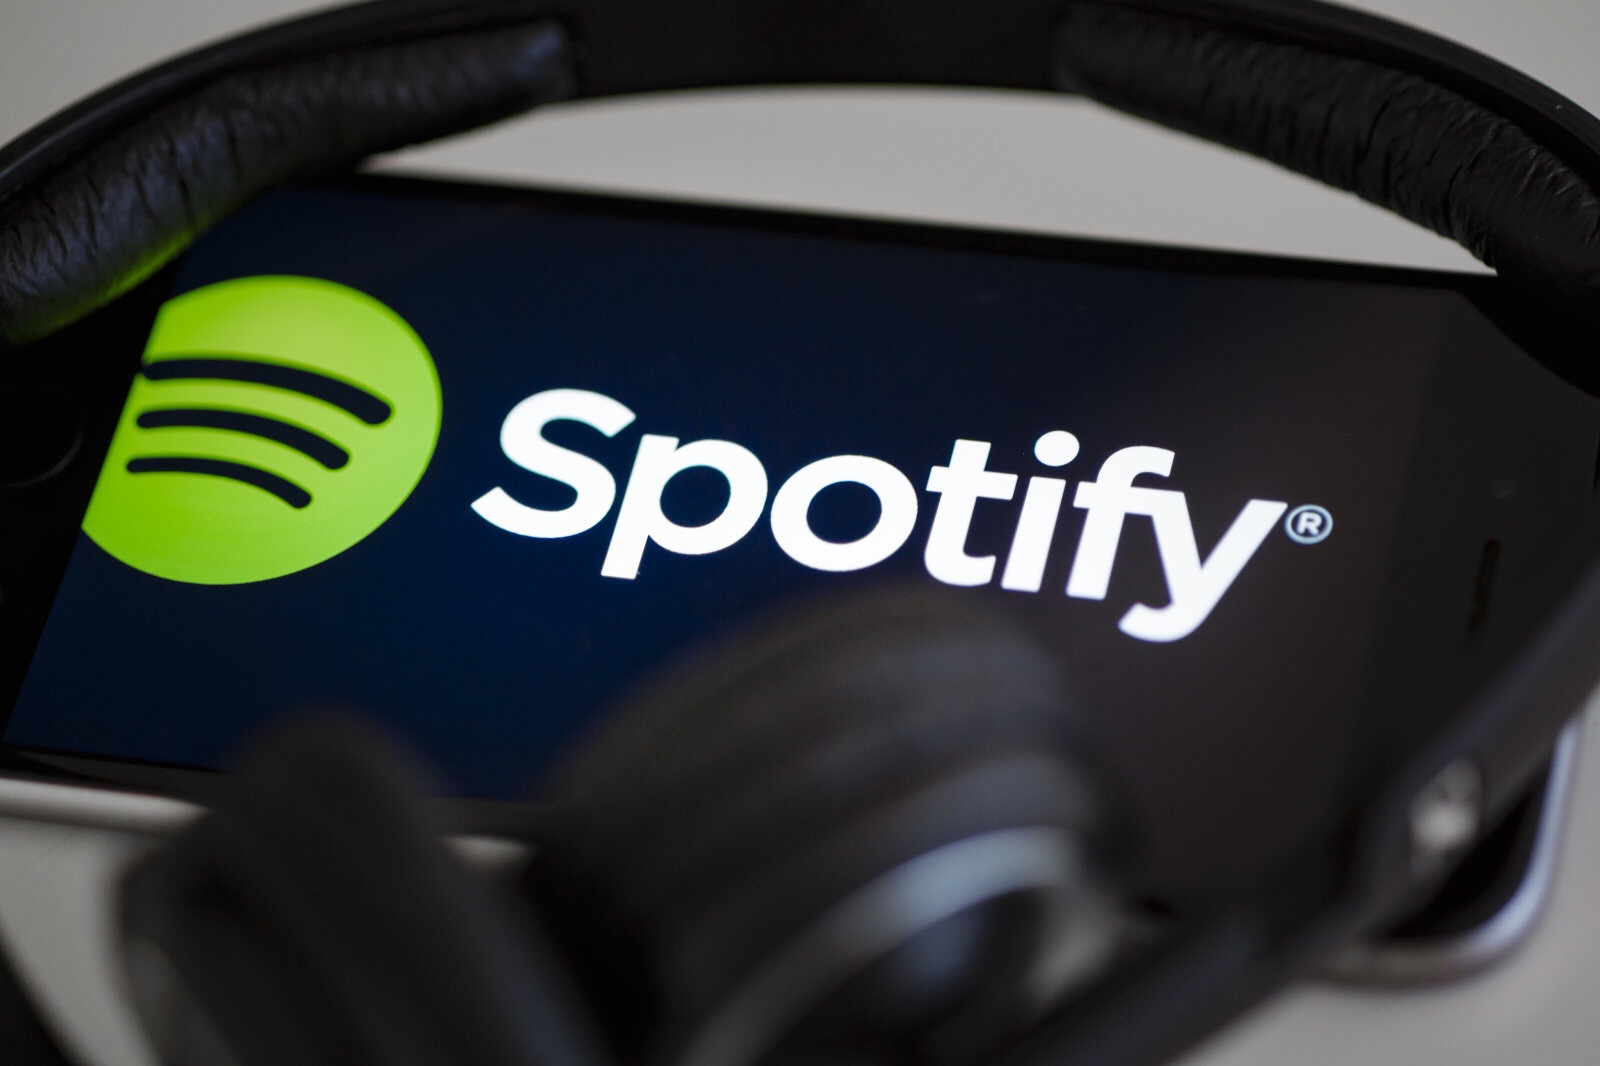 Next week, Spotify will reveal future plans of its mobile app